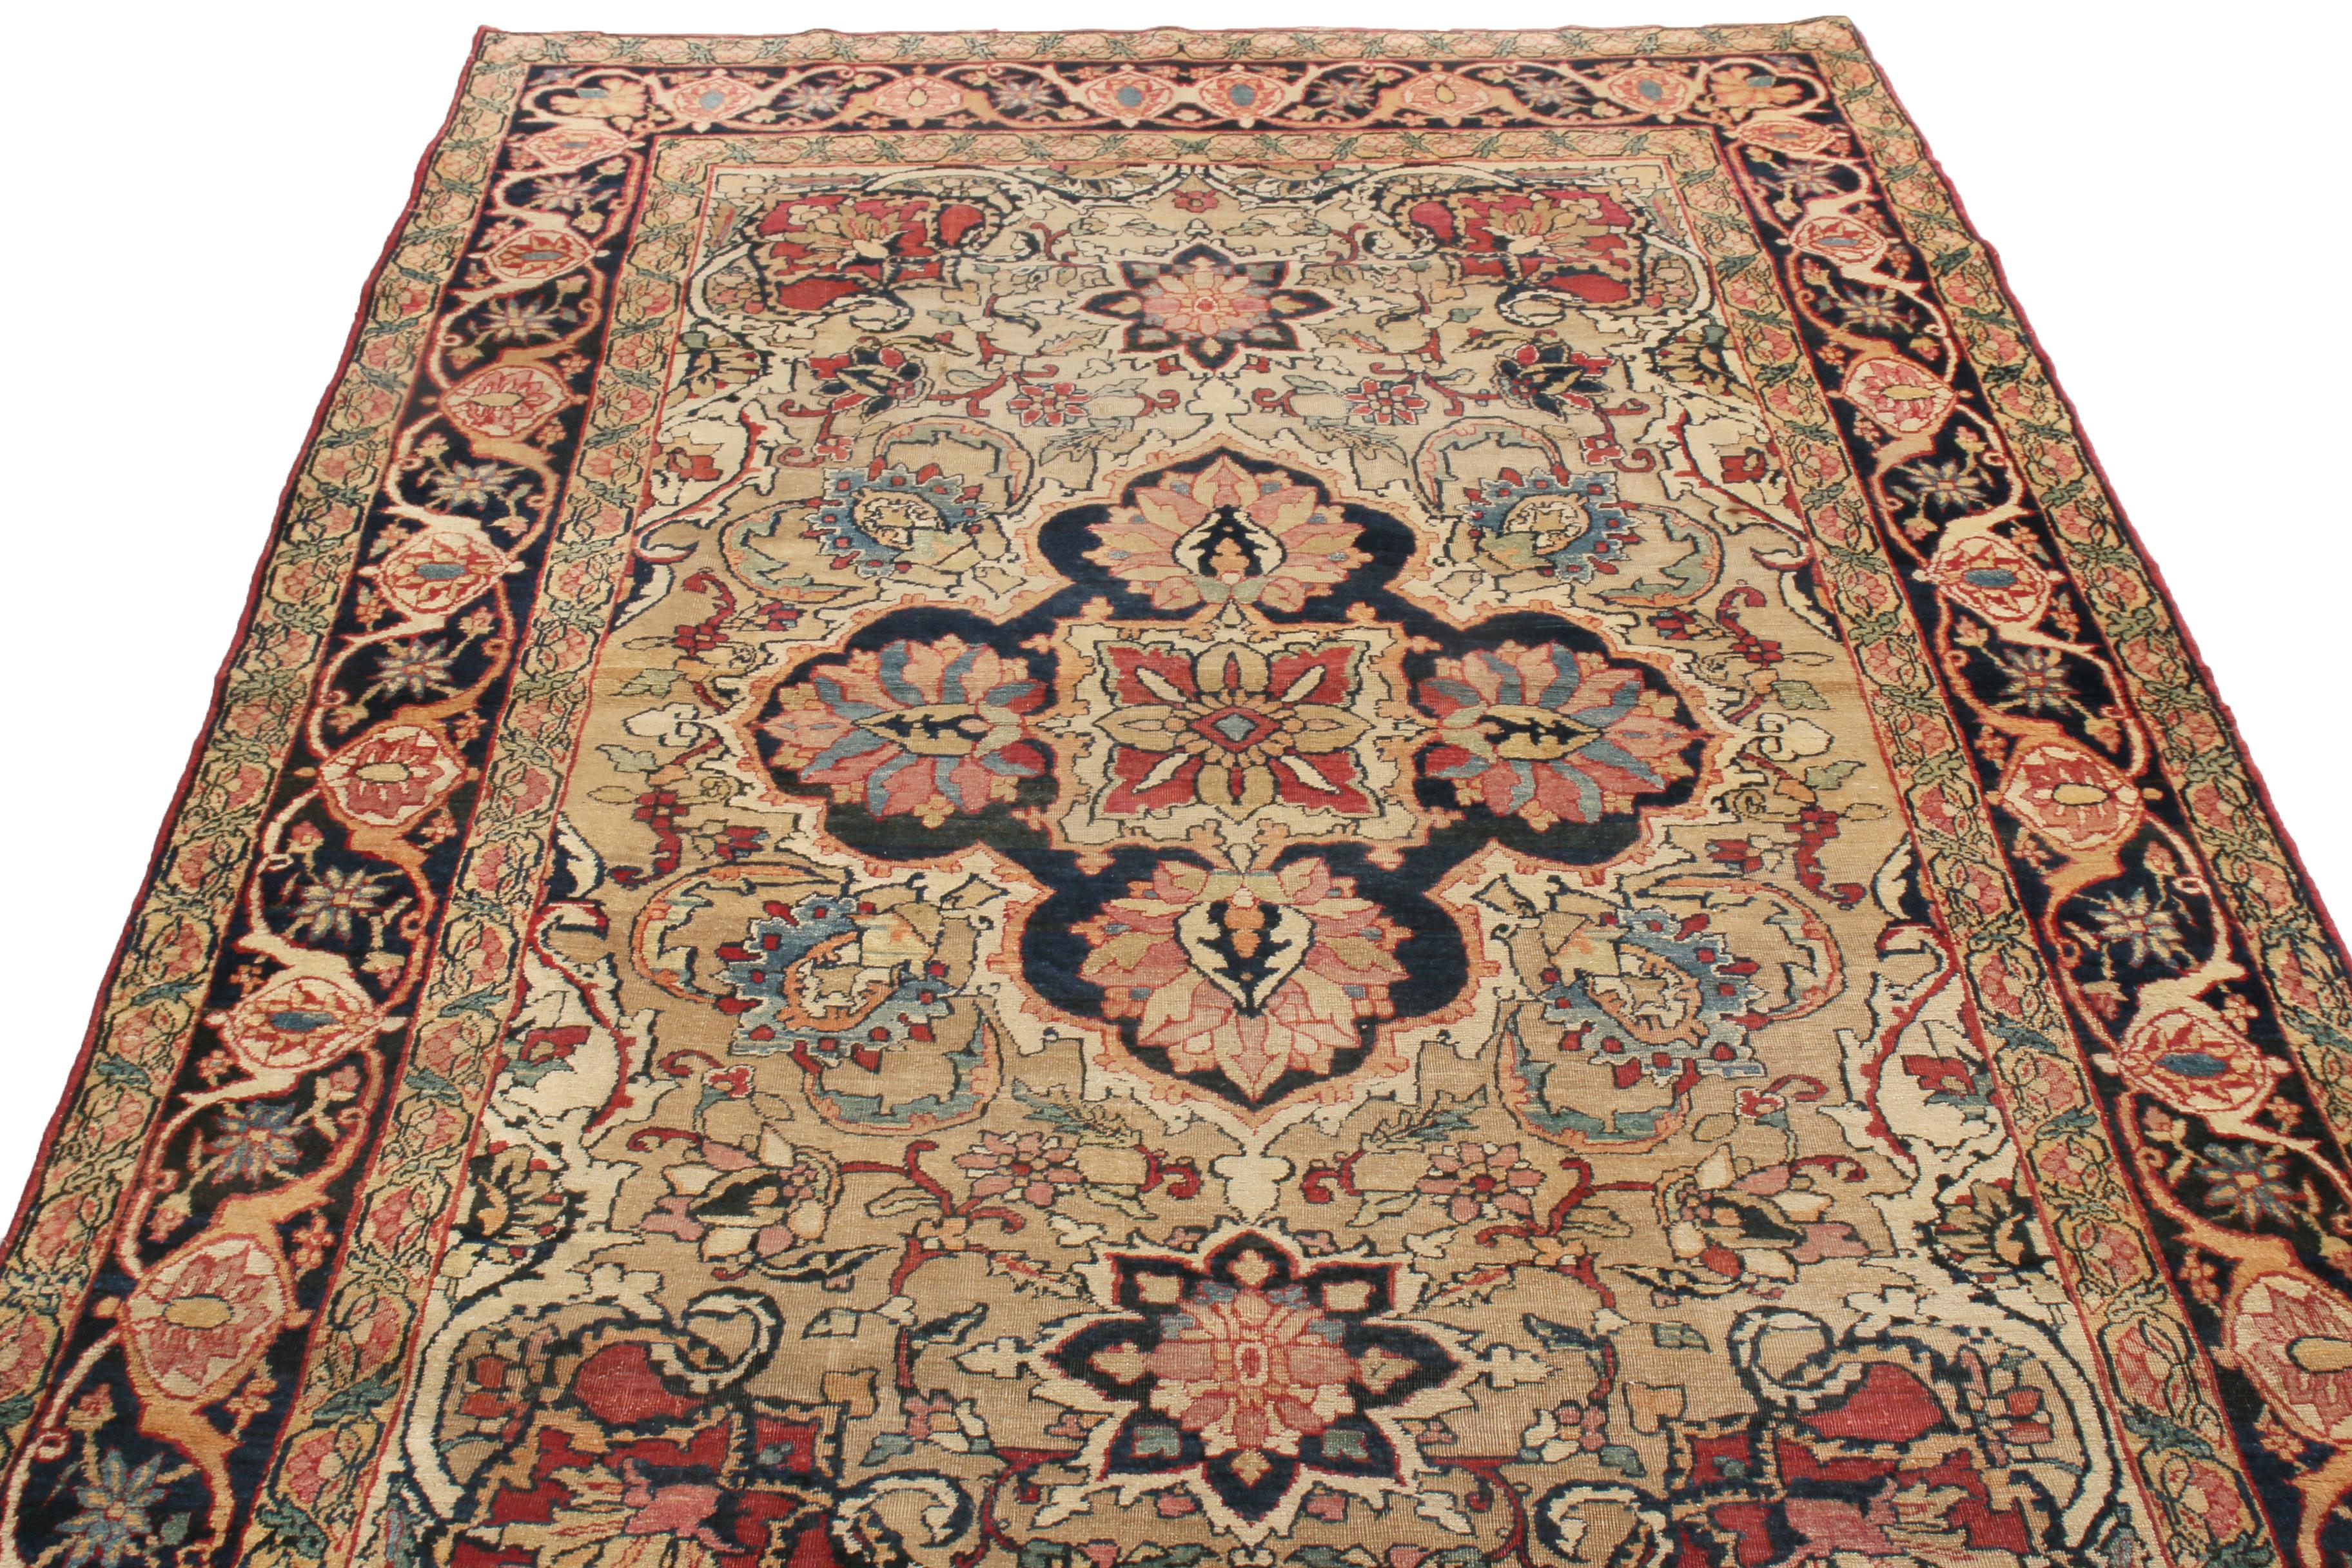 Hand knotted in one of the most widely respected rug capitals of Persia in 1900, this antique Kerman Lavar piece utilizes a combination of lotus palmette motifs with jubilant, forgiving beige and pink colourways throughout its field and borders to